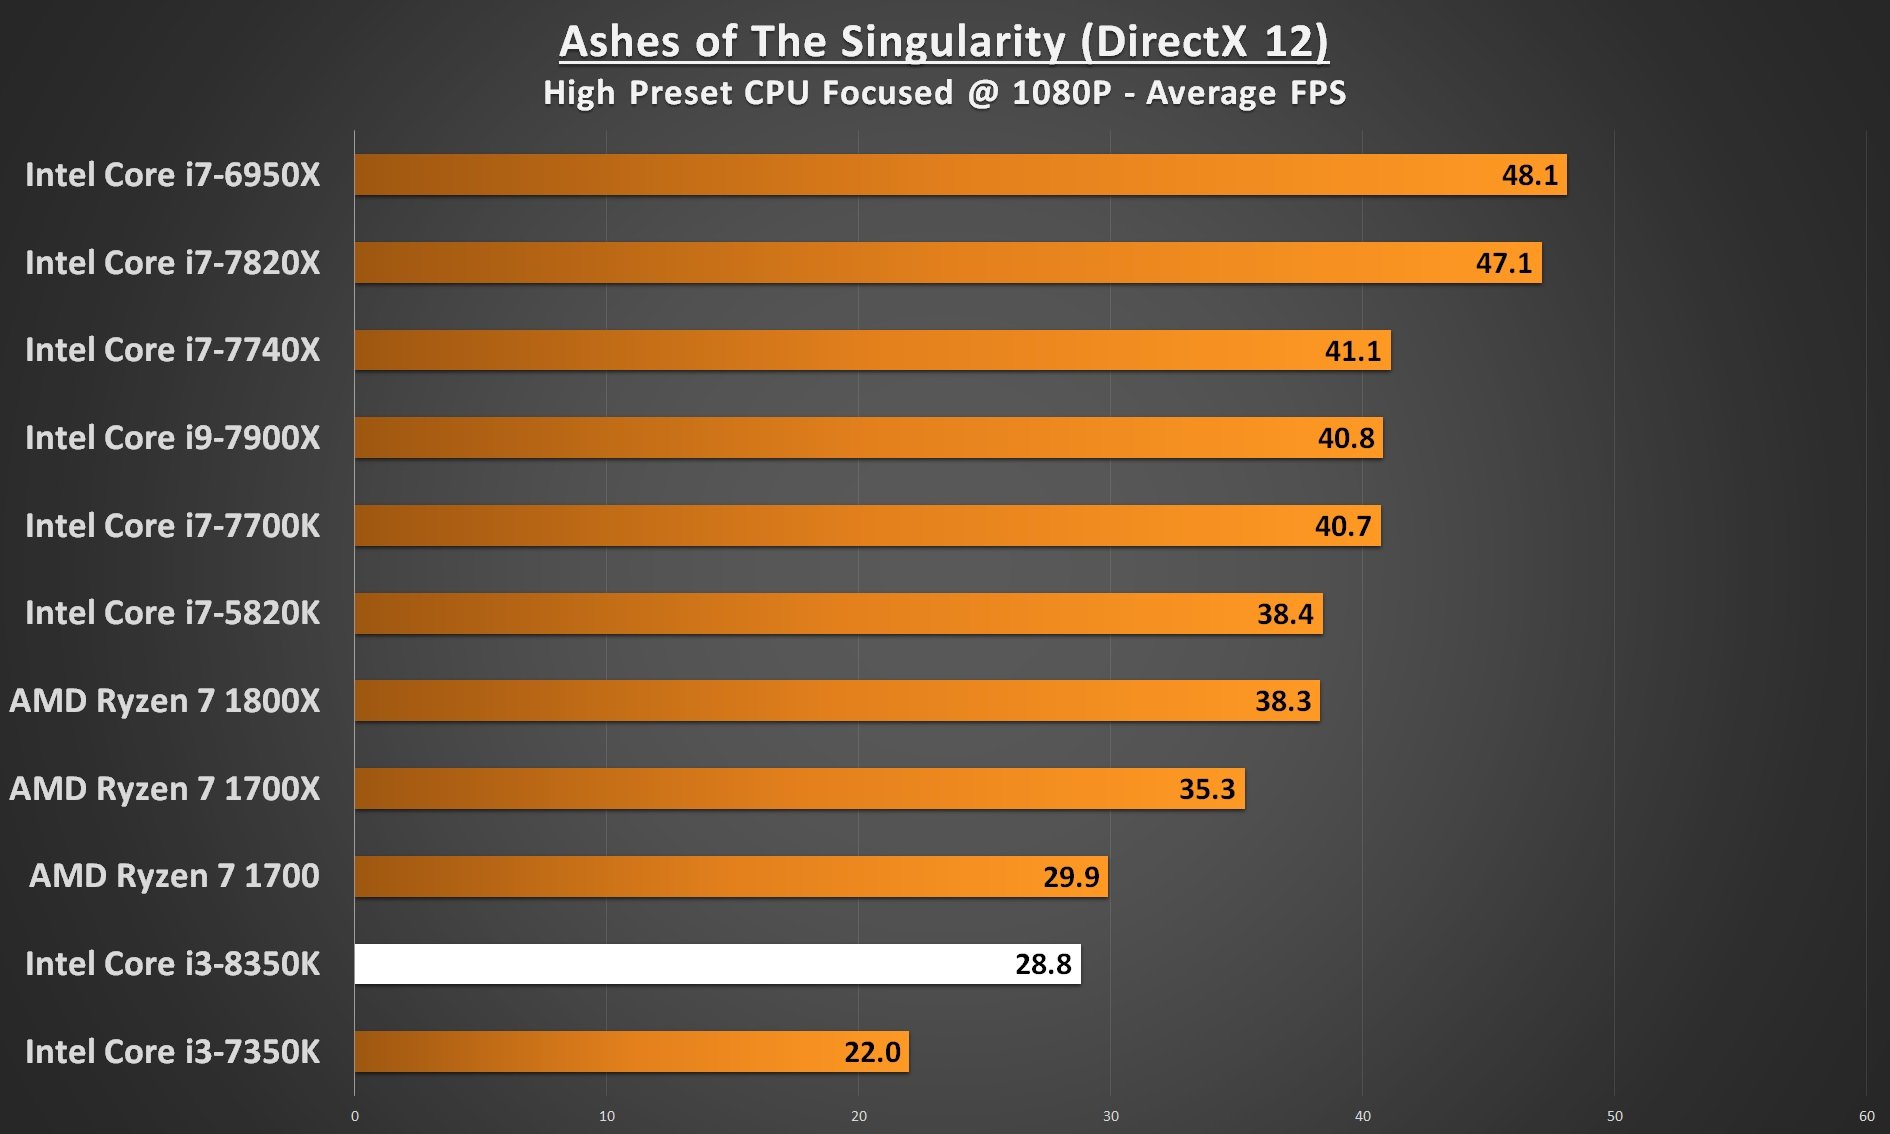 Intel Core i3-8350 Performance - Ashes of the Singularity DirectX 12 1080p